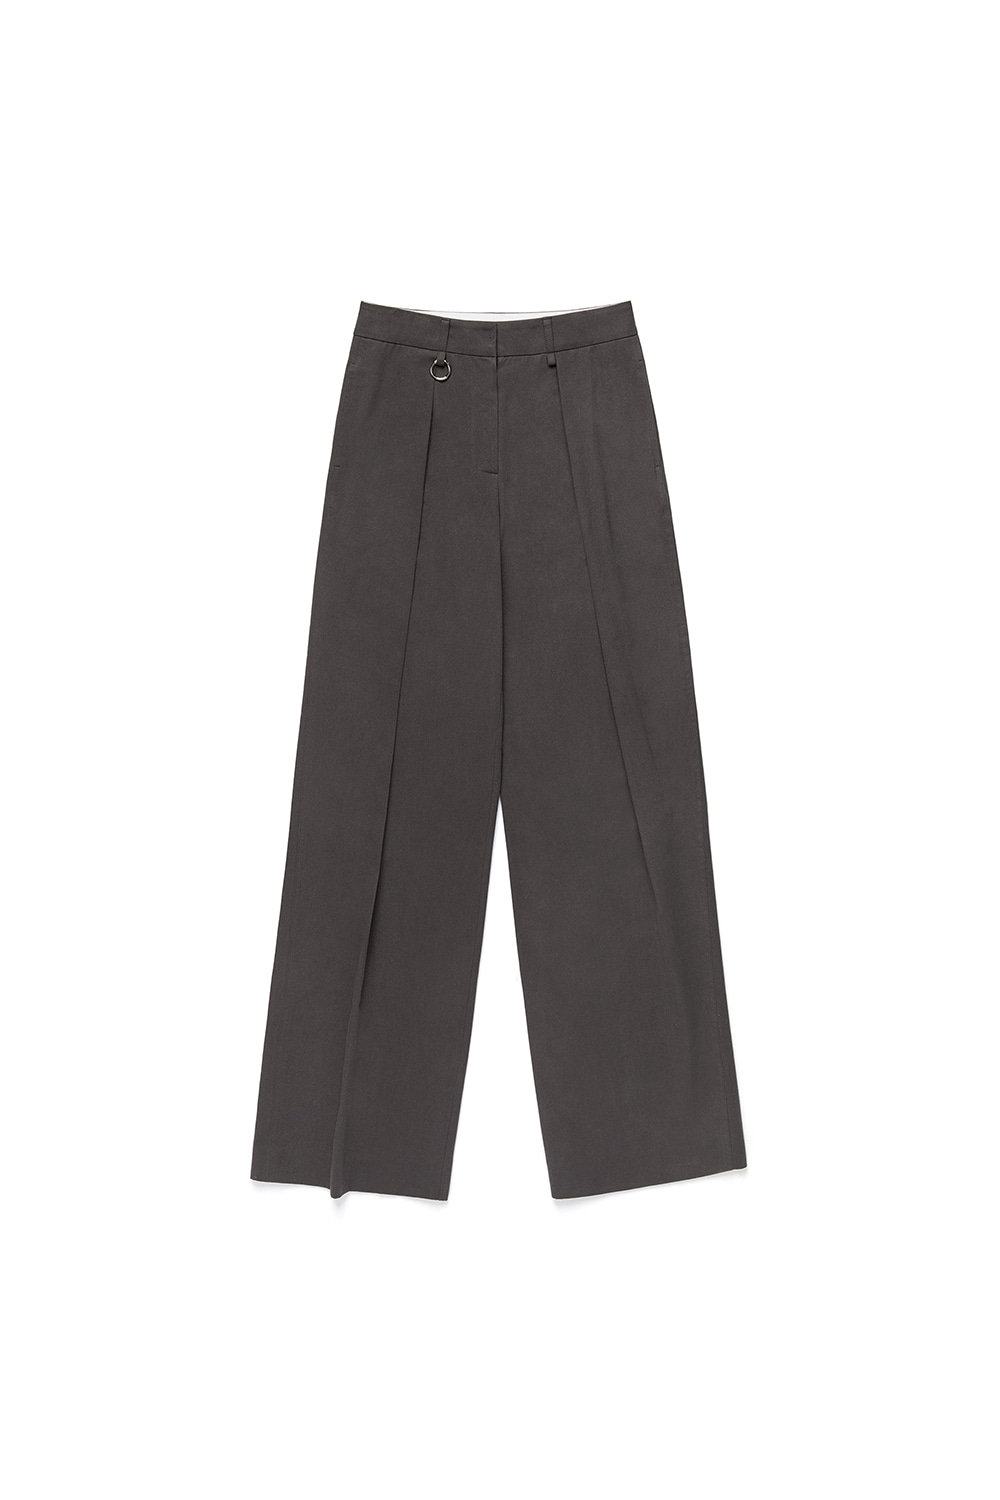 DOUBLE PLEATED COTTON PANTS [CHARCOAL]		